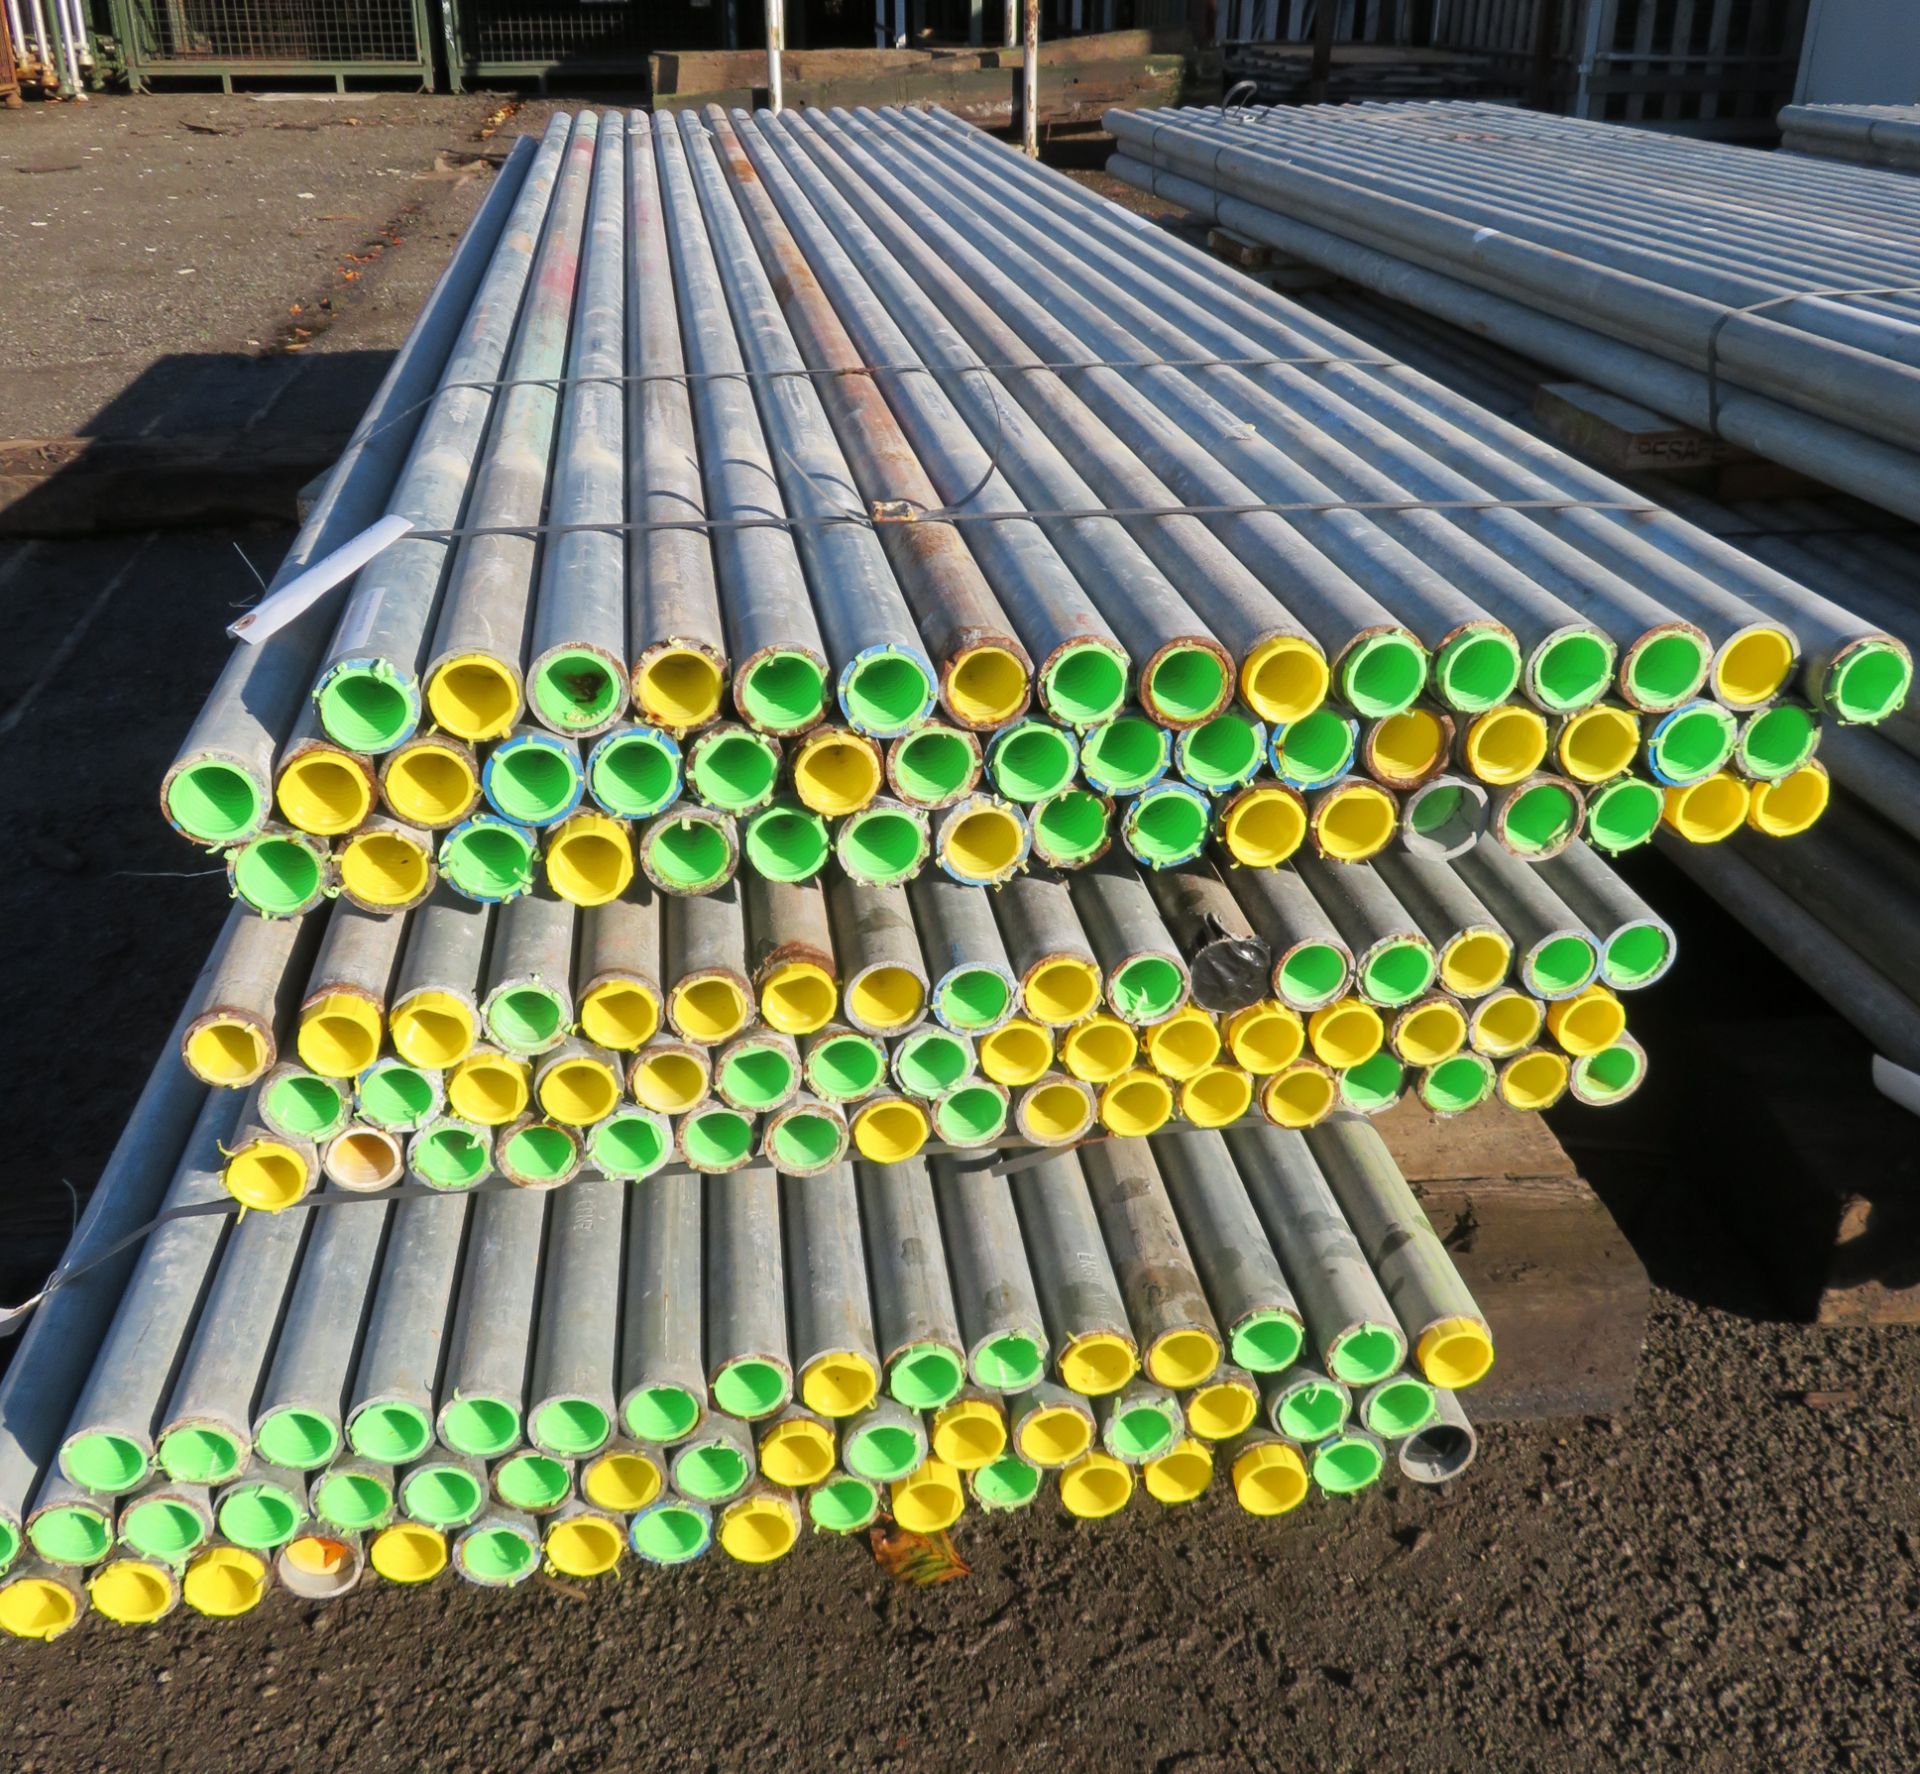 150x 10ft Galvanised Steel Scaffolding Poles 48mm Diameter x 4mm Thick. - Image 3 of 4